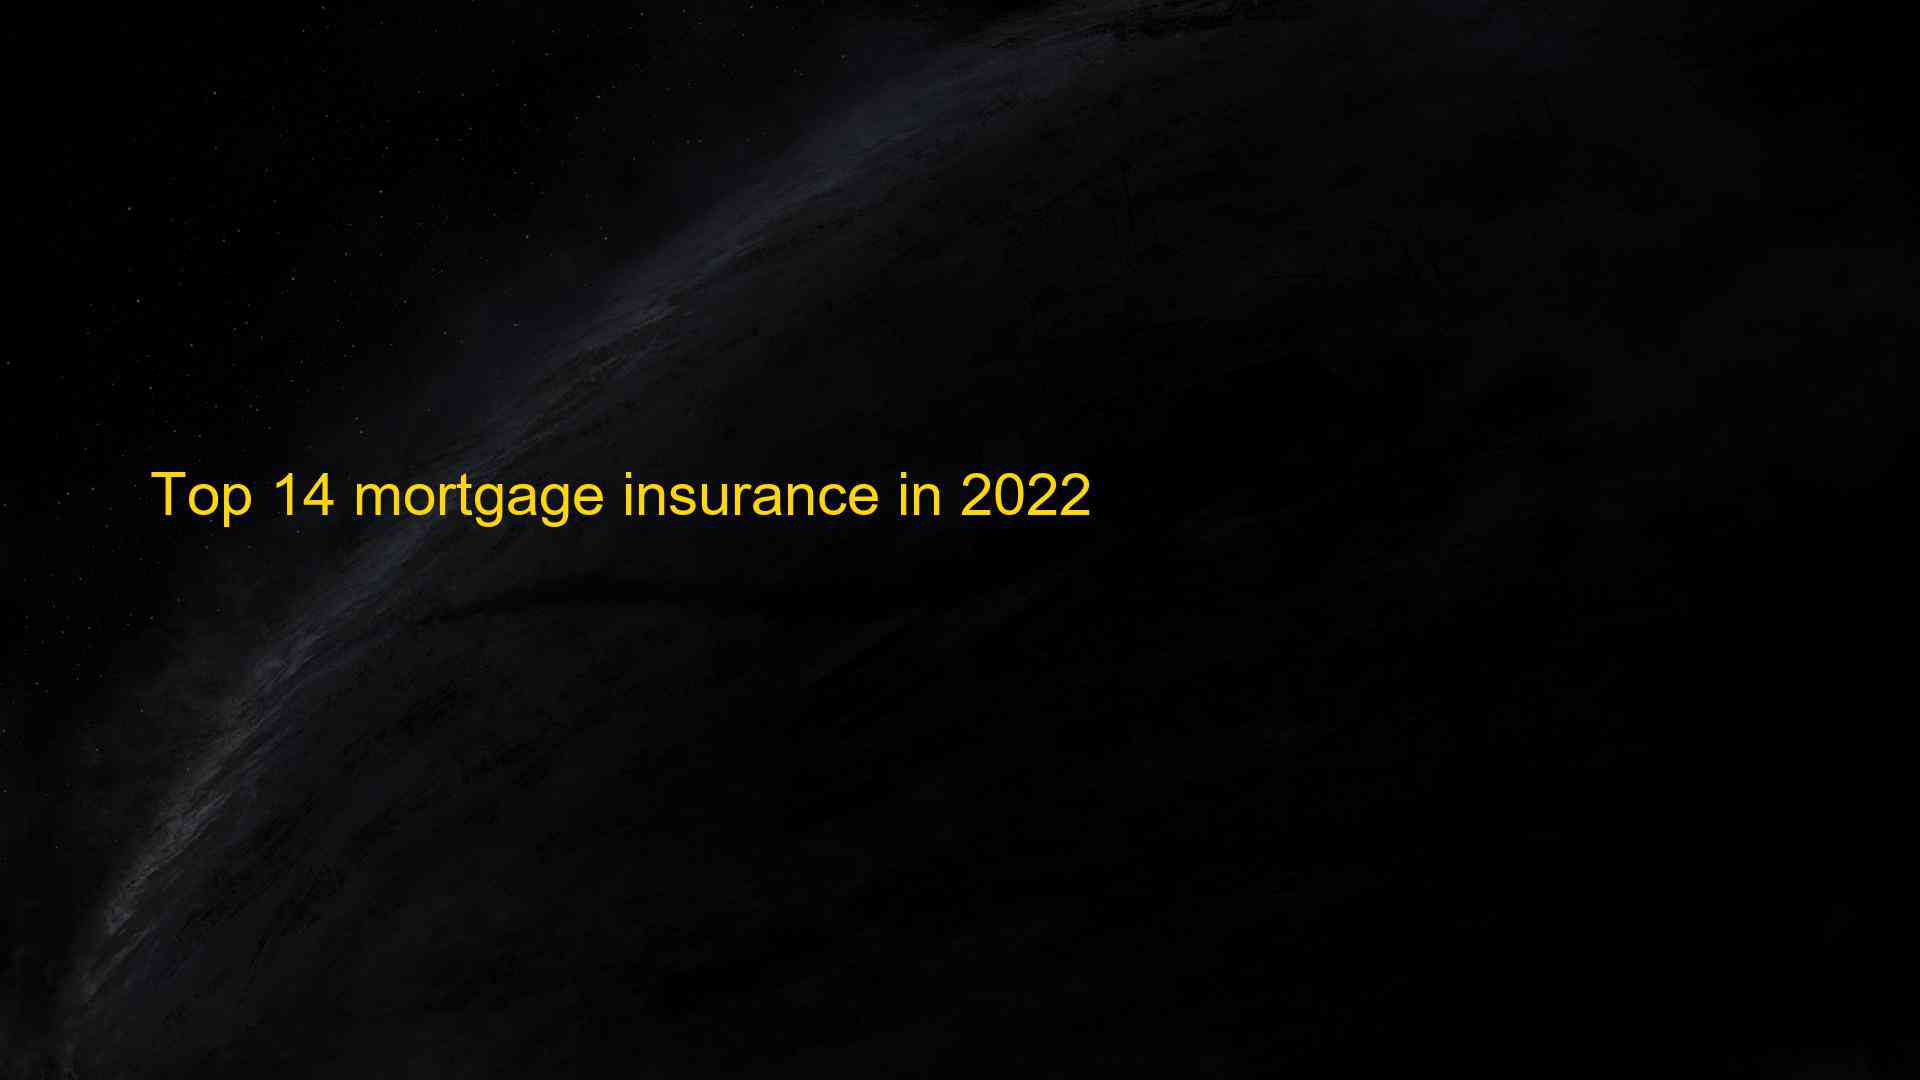 Top 14 mortgage insurance in 2022 1660489976